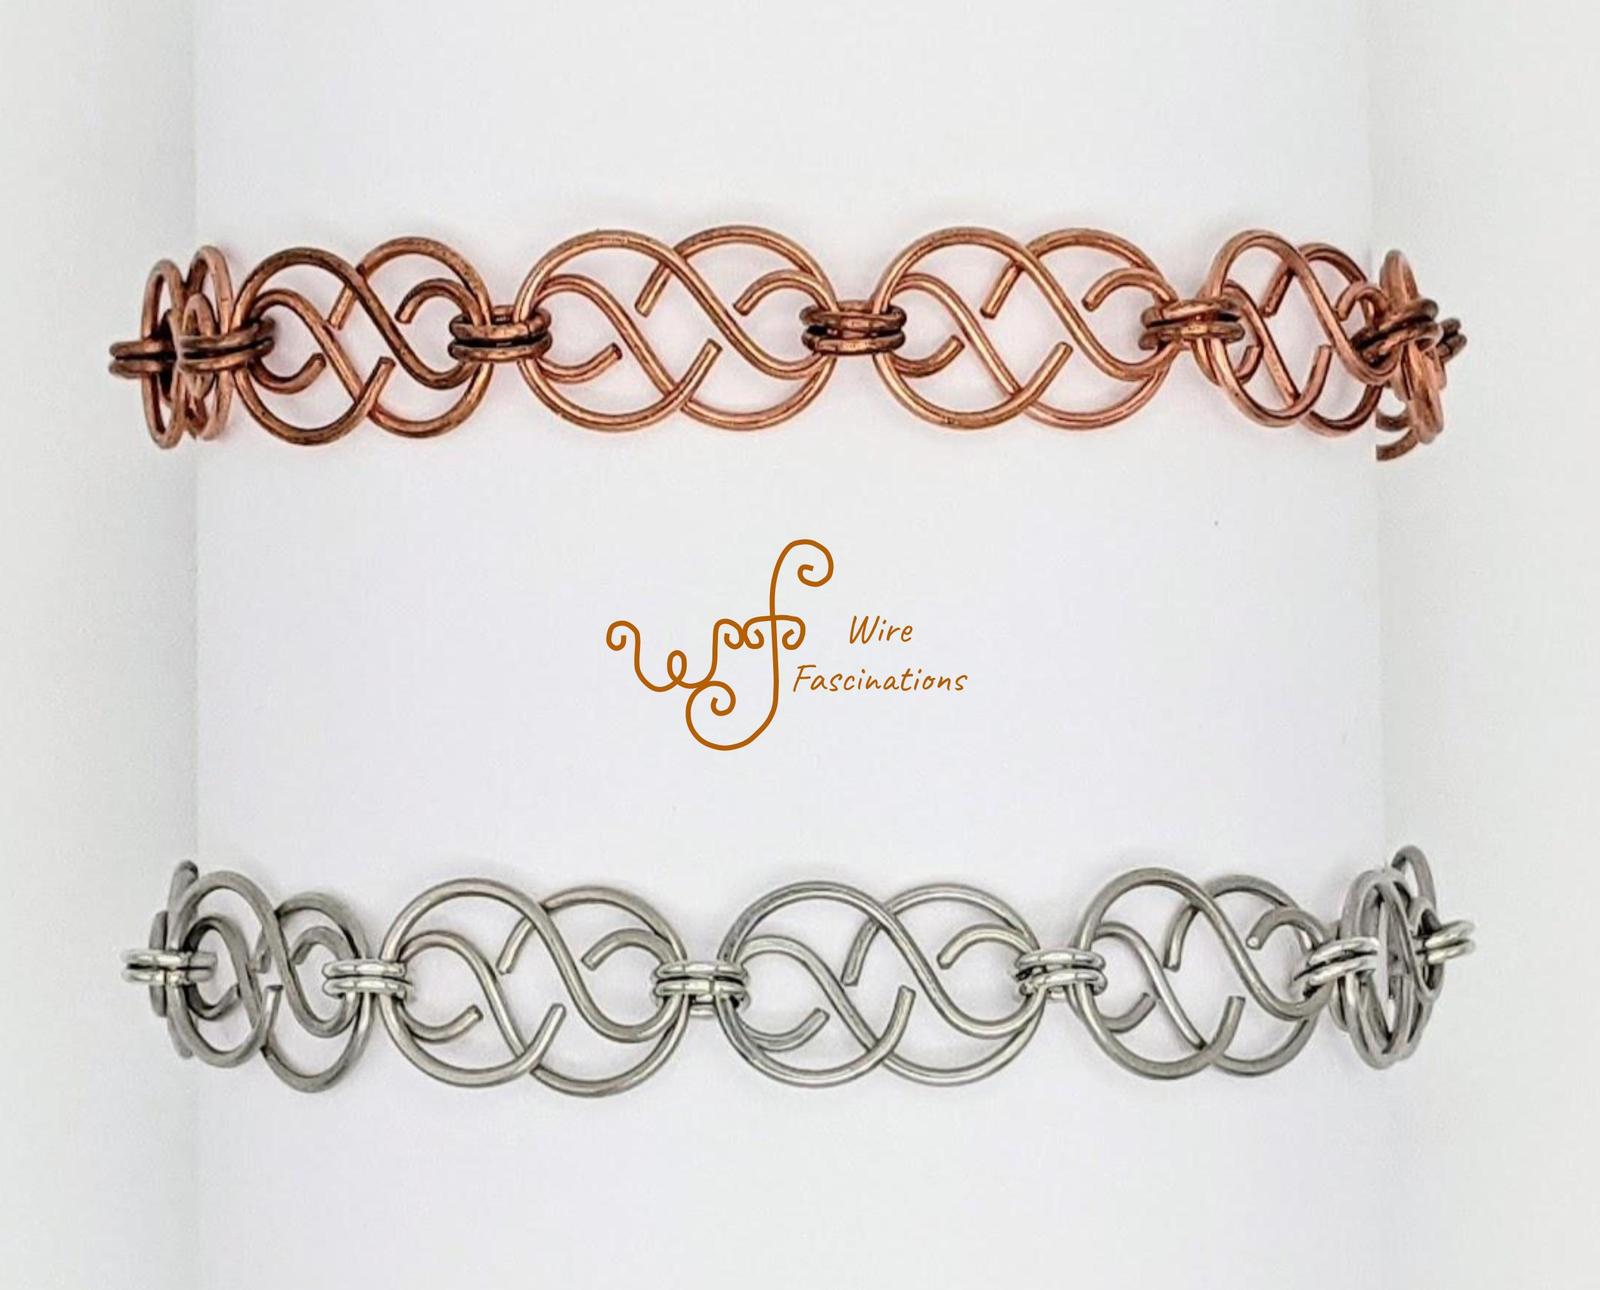 Handmade solid copper or stainless steel bracelet: Celtic chained links